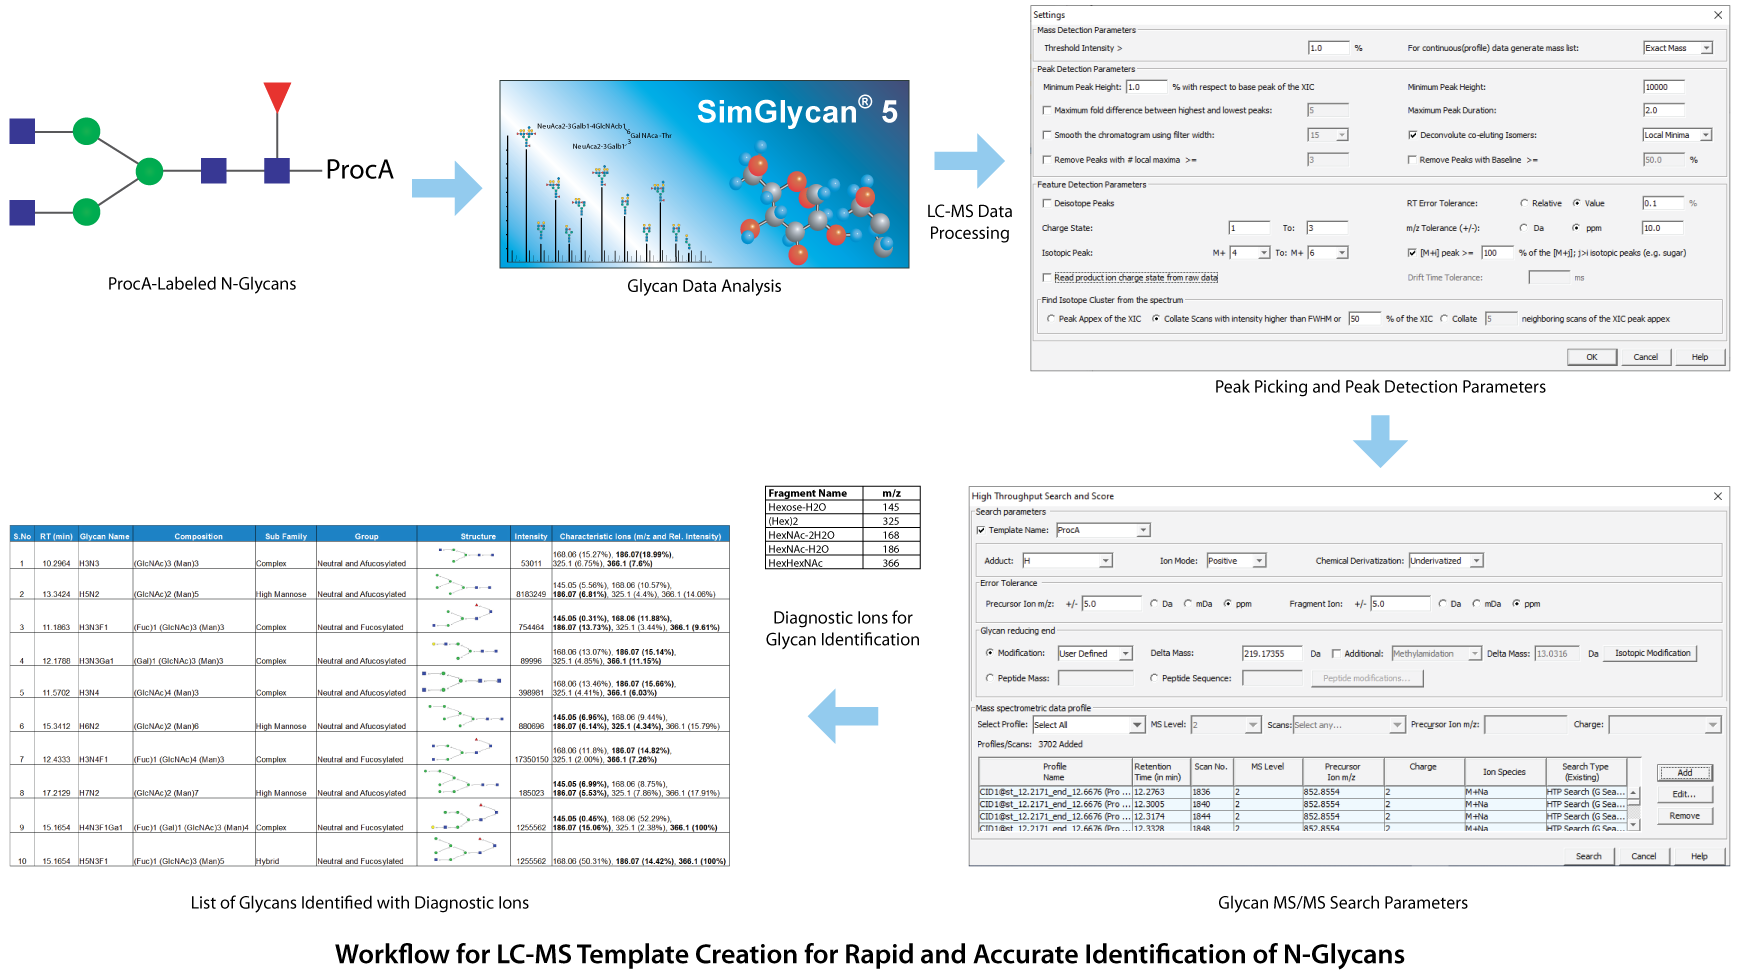 Workflow for LC-MS Template Creation for Rapid and Accurate Identification of N-Glycans